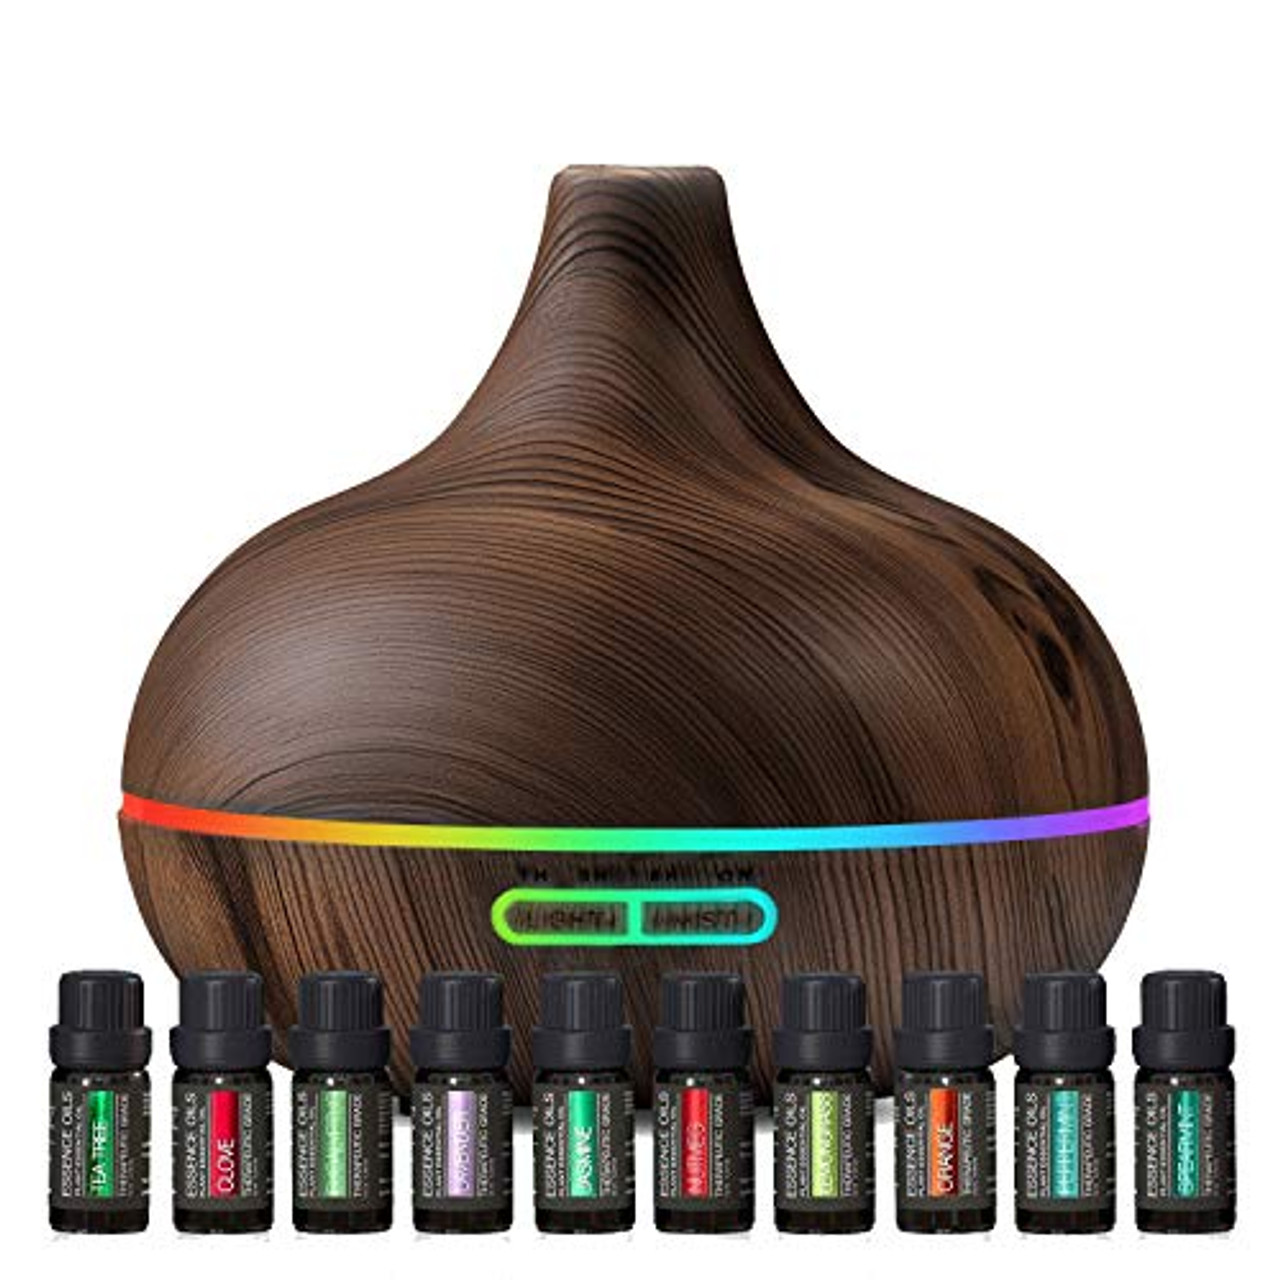 Ultimate Aromatherapy Diffuser & Essential Oil Set - Ultrasonic Diffuser & Top 10 Essential Oils - Modern Diffuser with 4 Timer & 7 Ambient Light